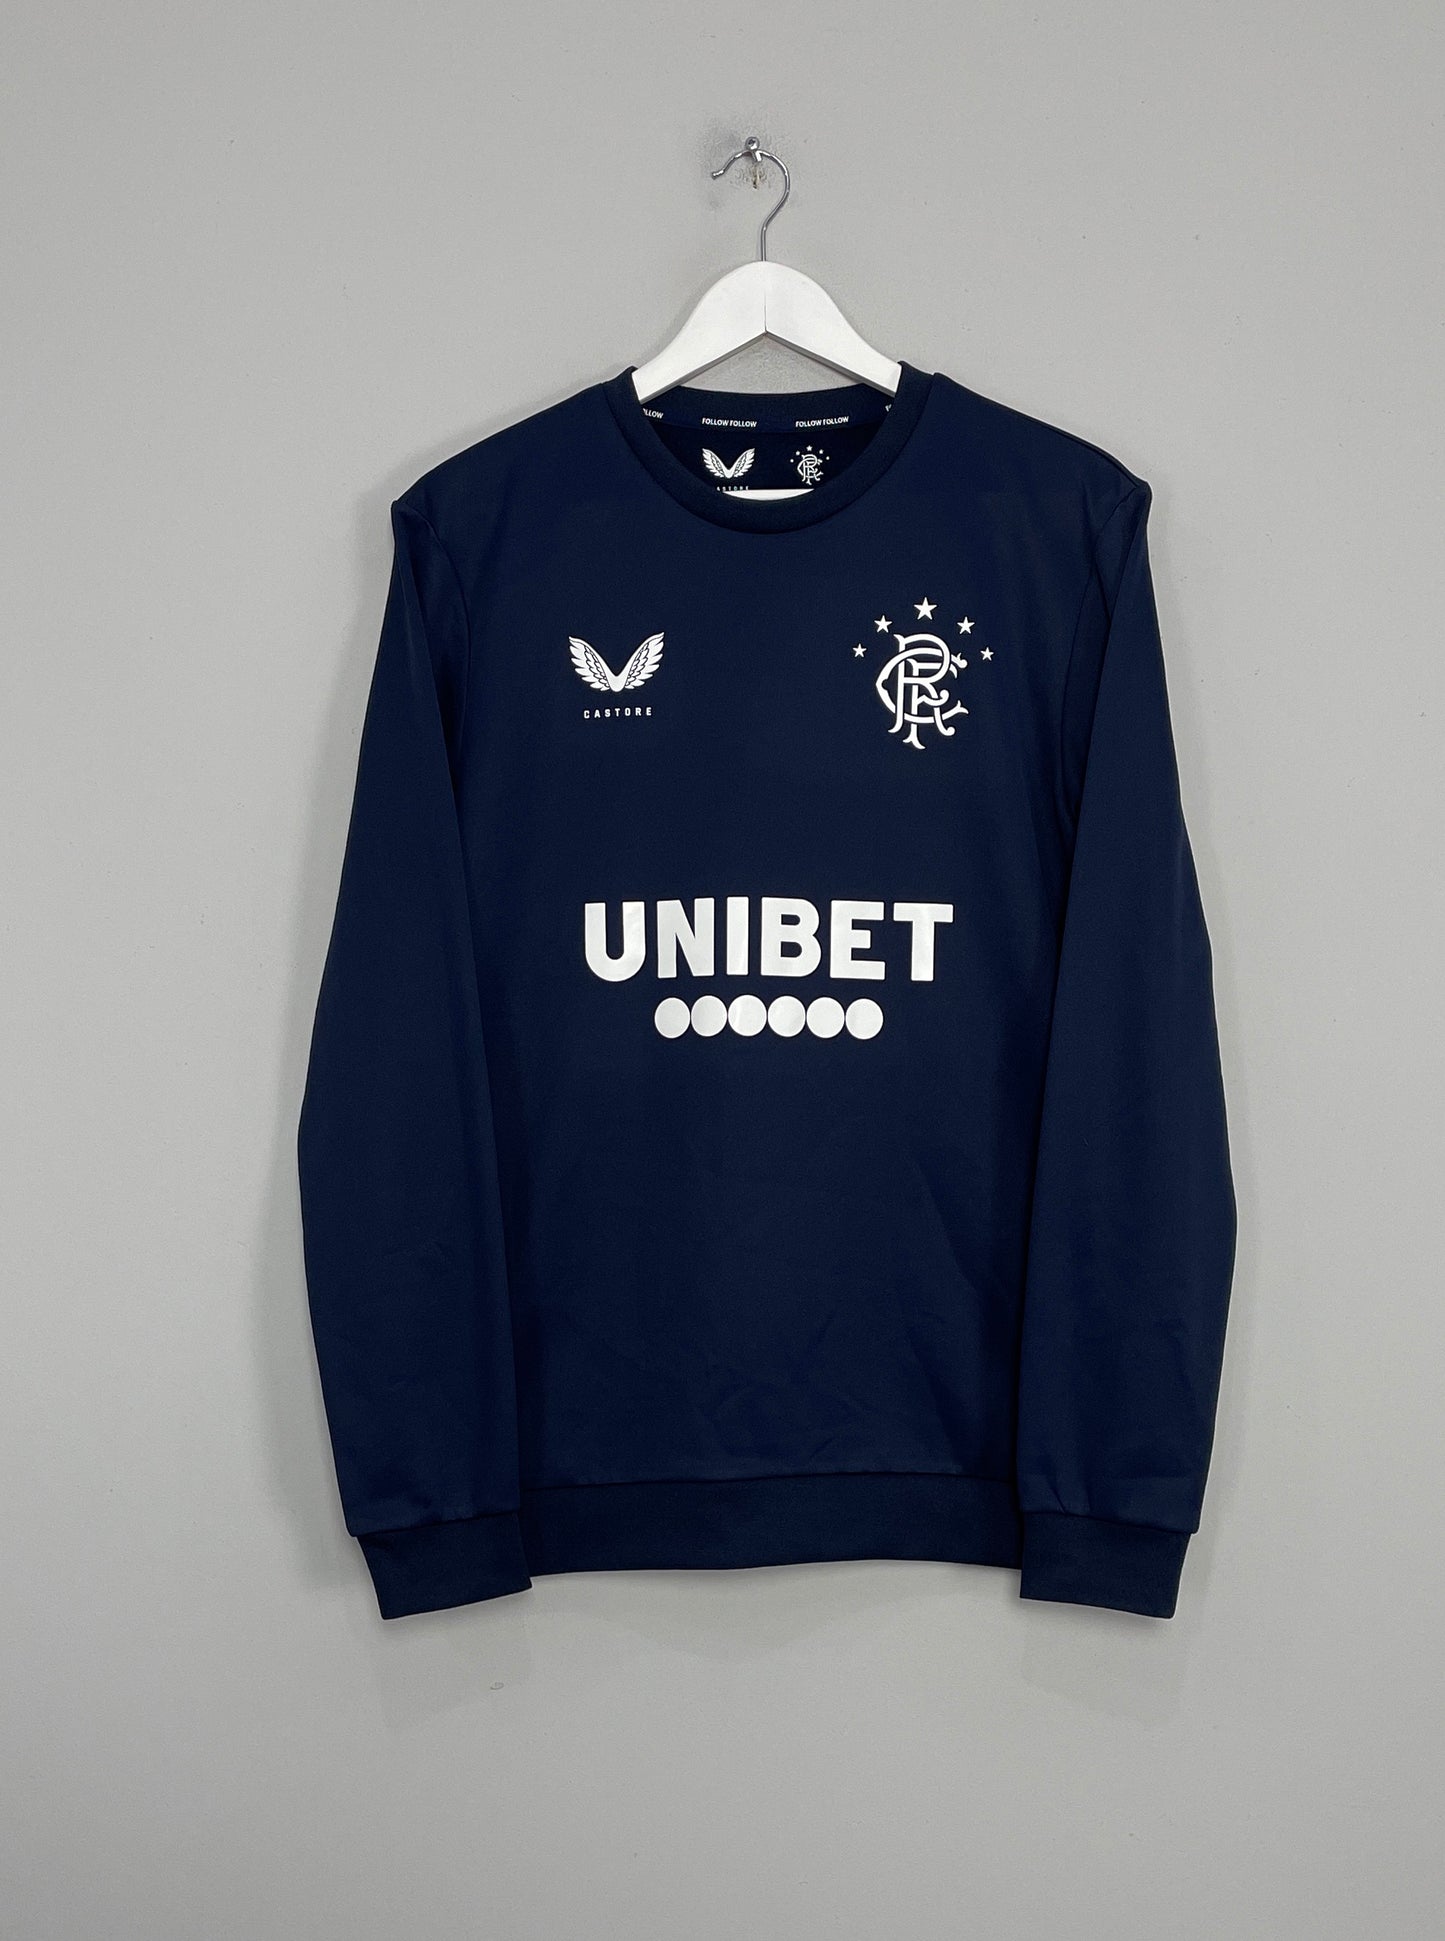 Image of the Rangers training jumper from the 2020/21